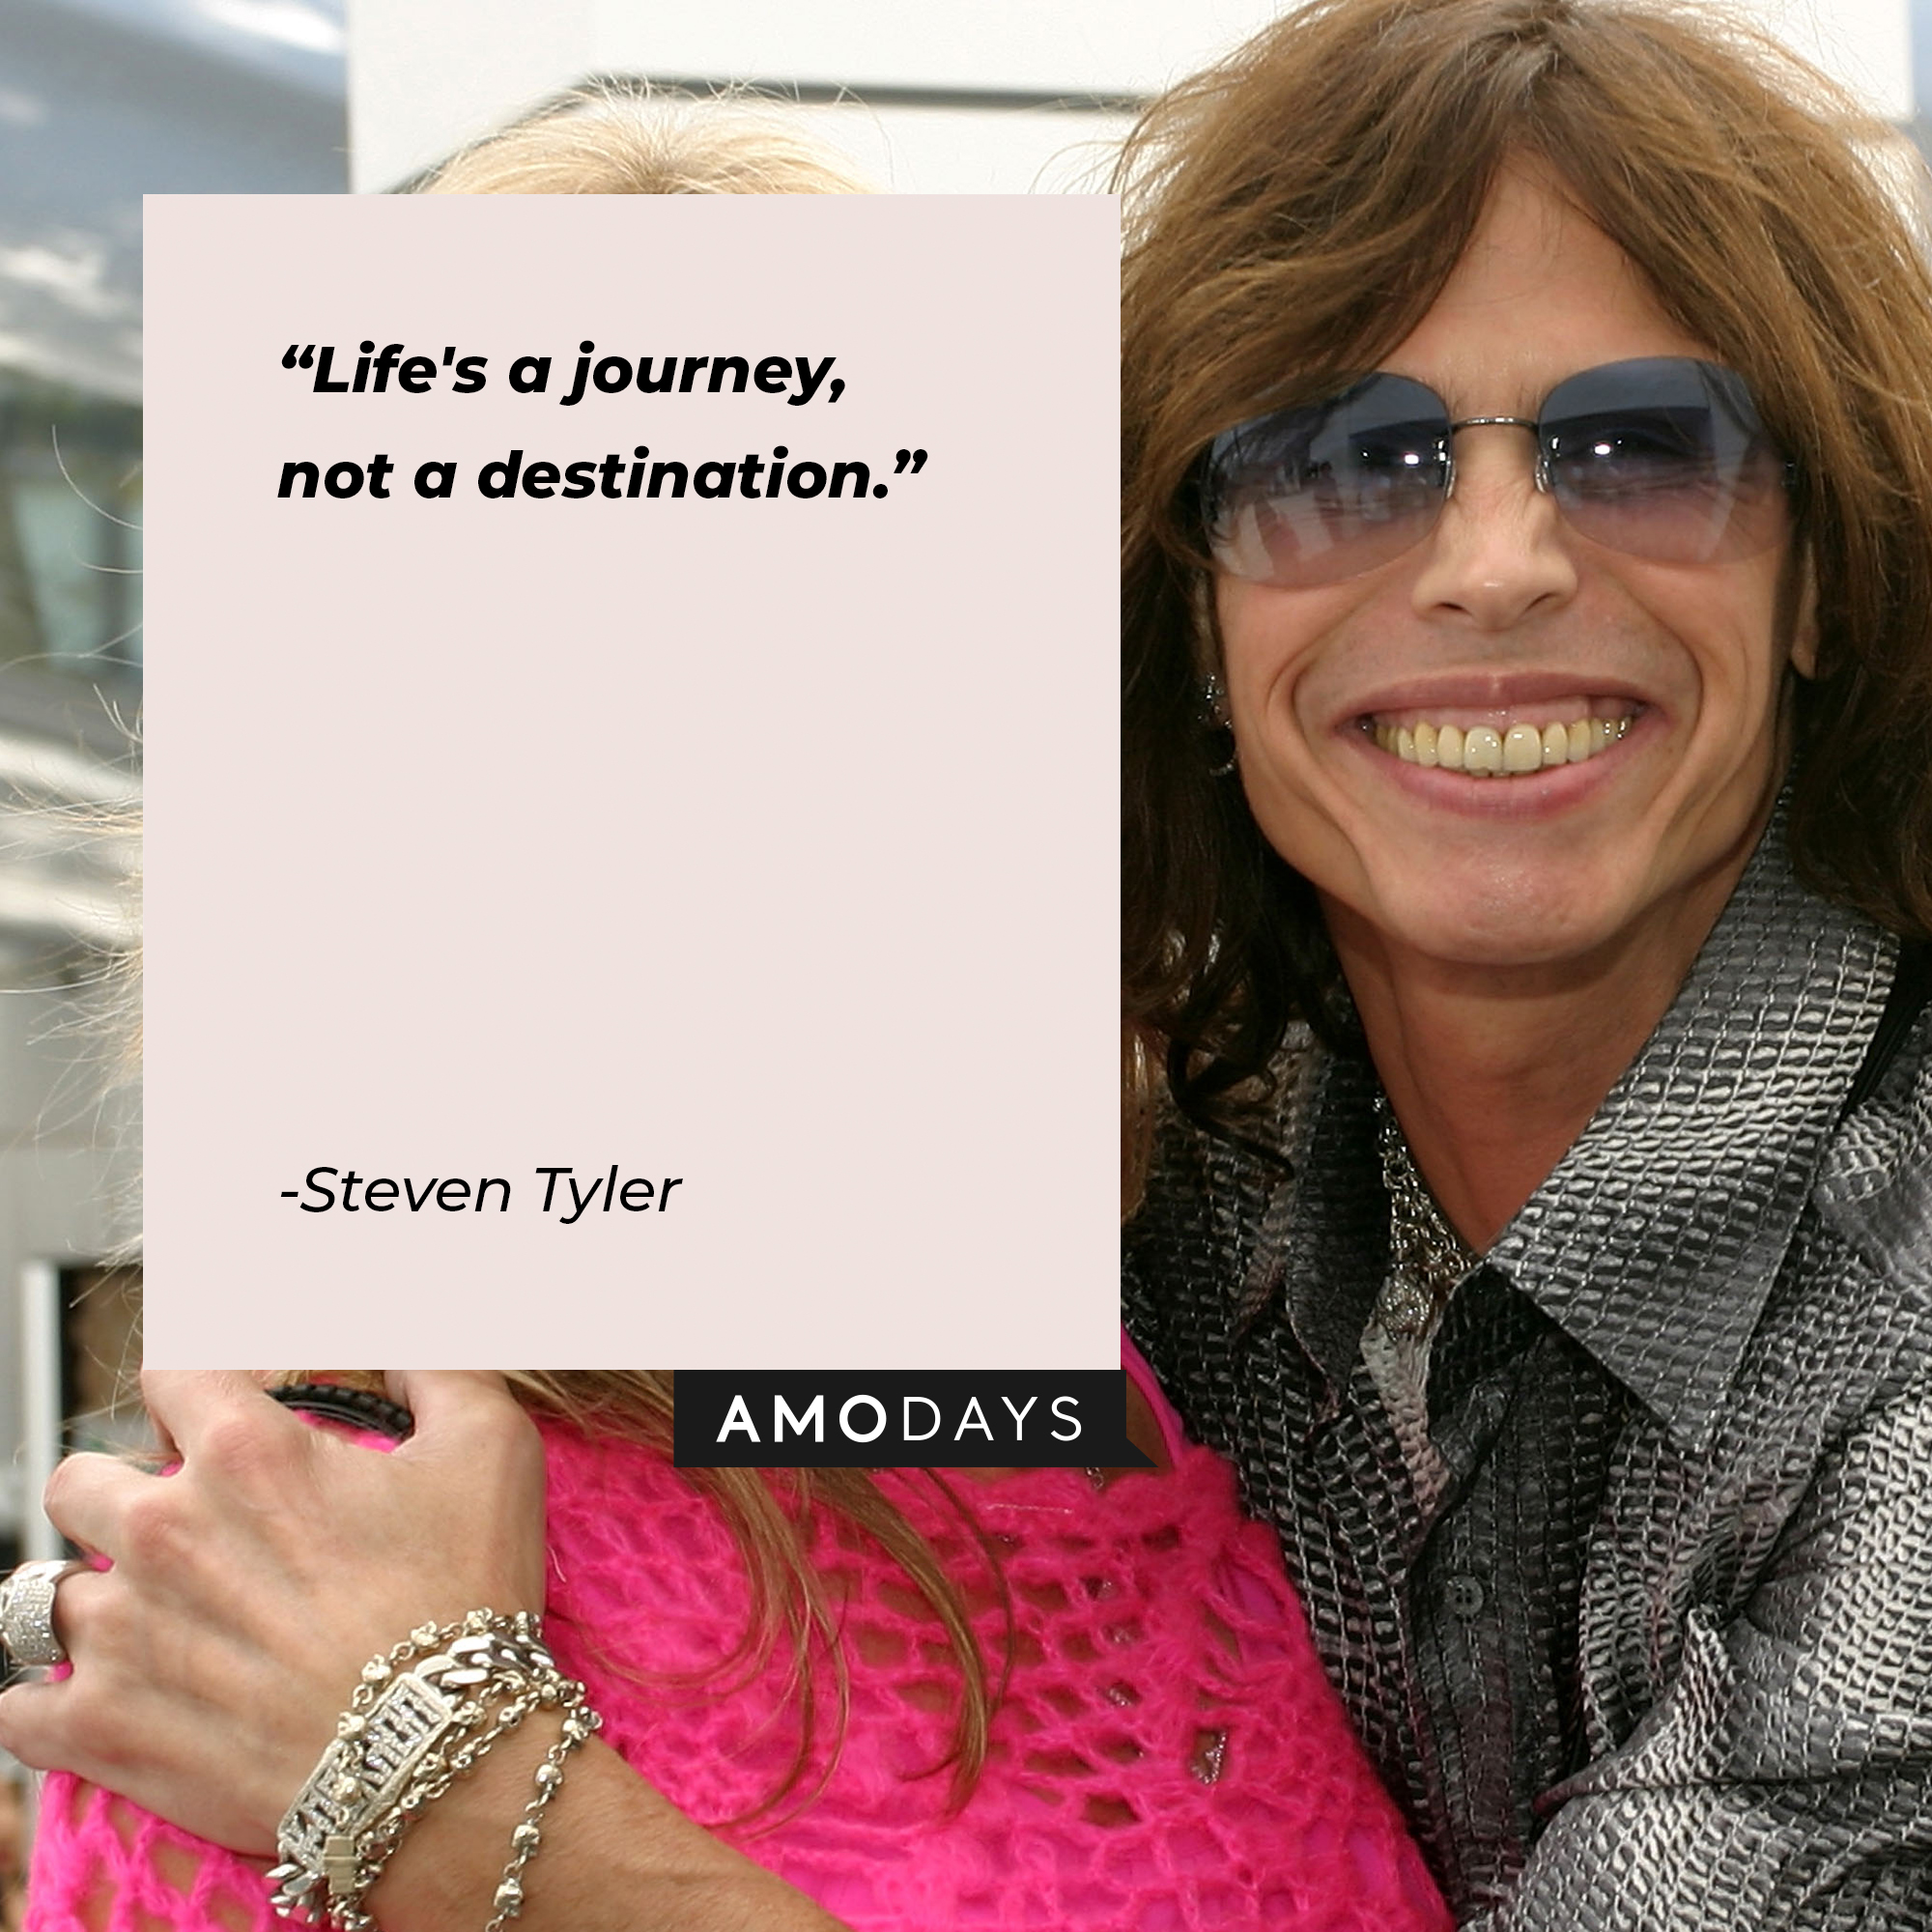 Steven Tyler's quote: "Life's a journey, not a destination." | Source: Getty Images